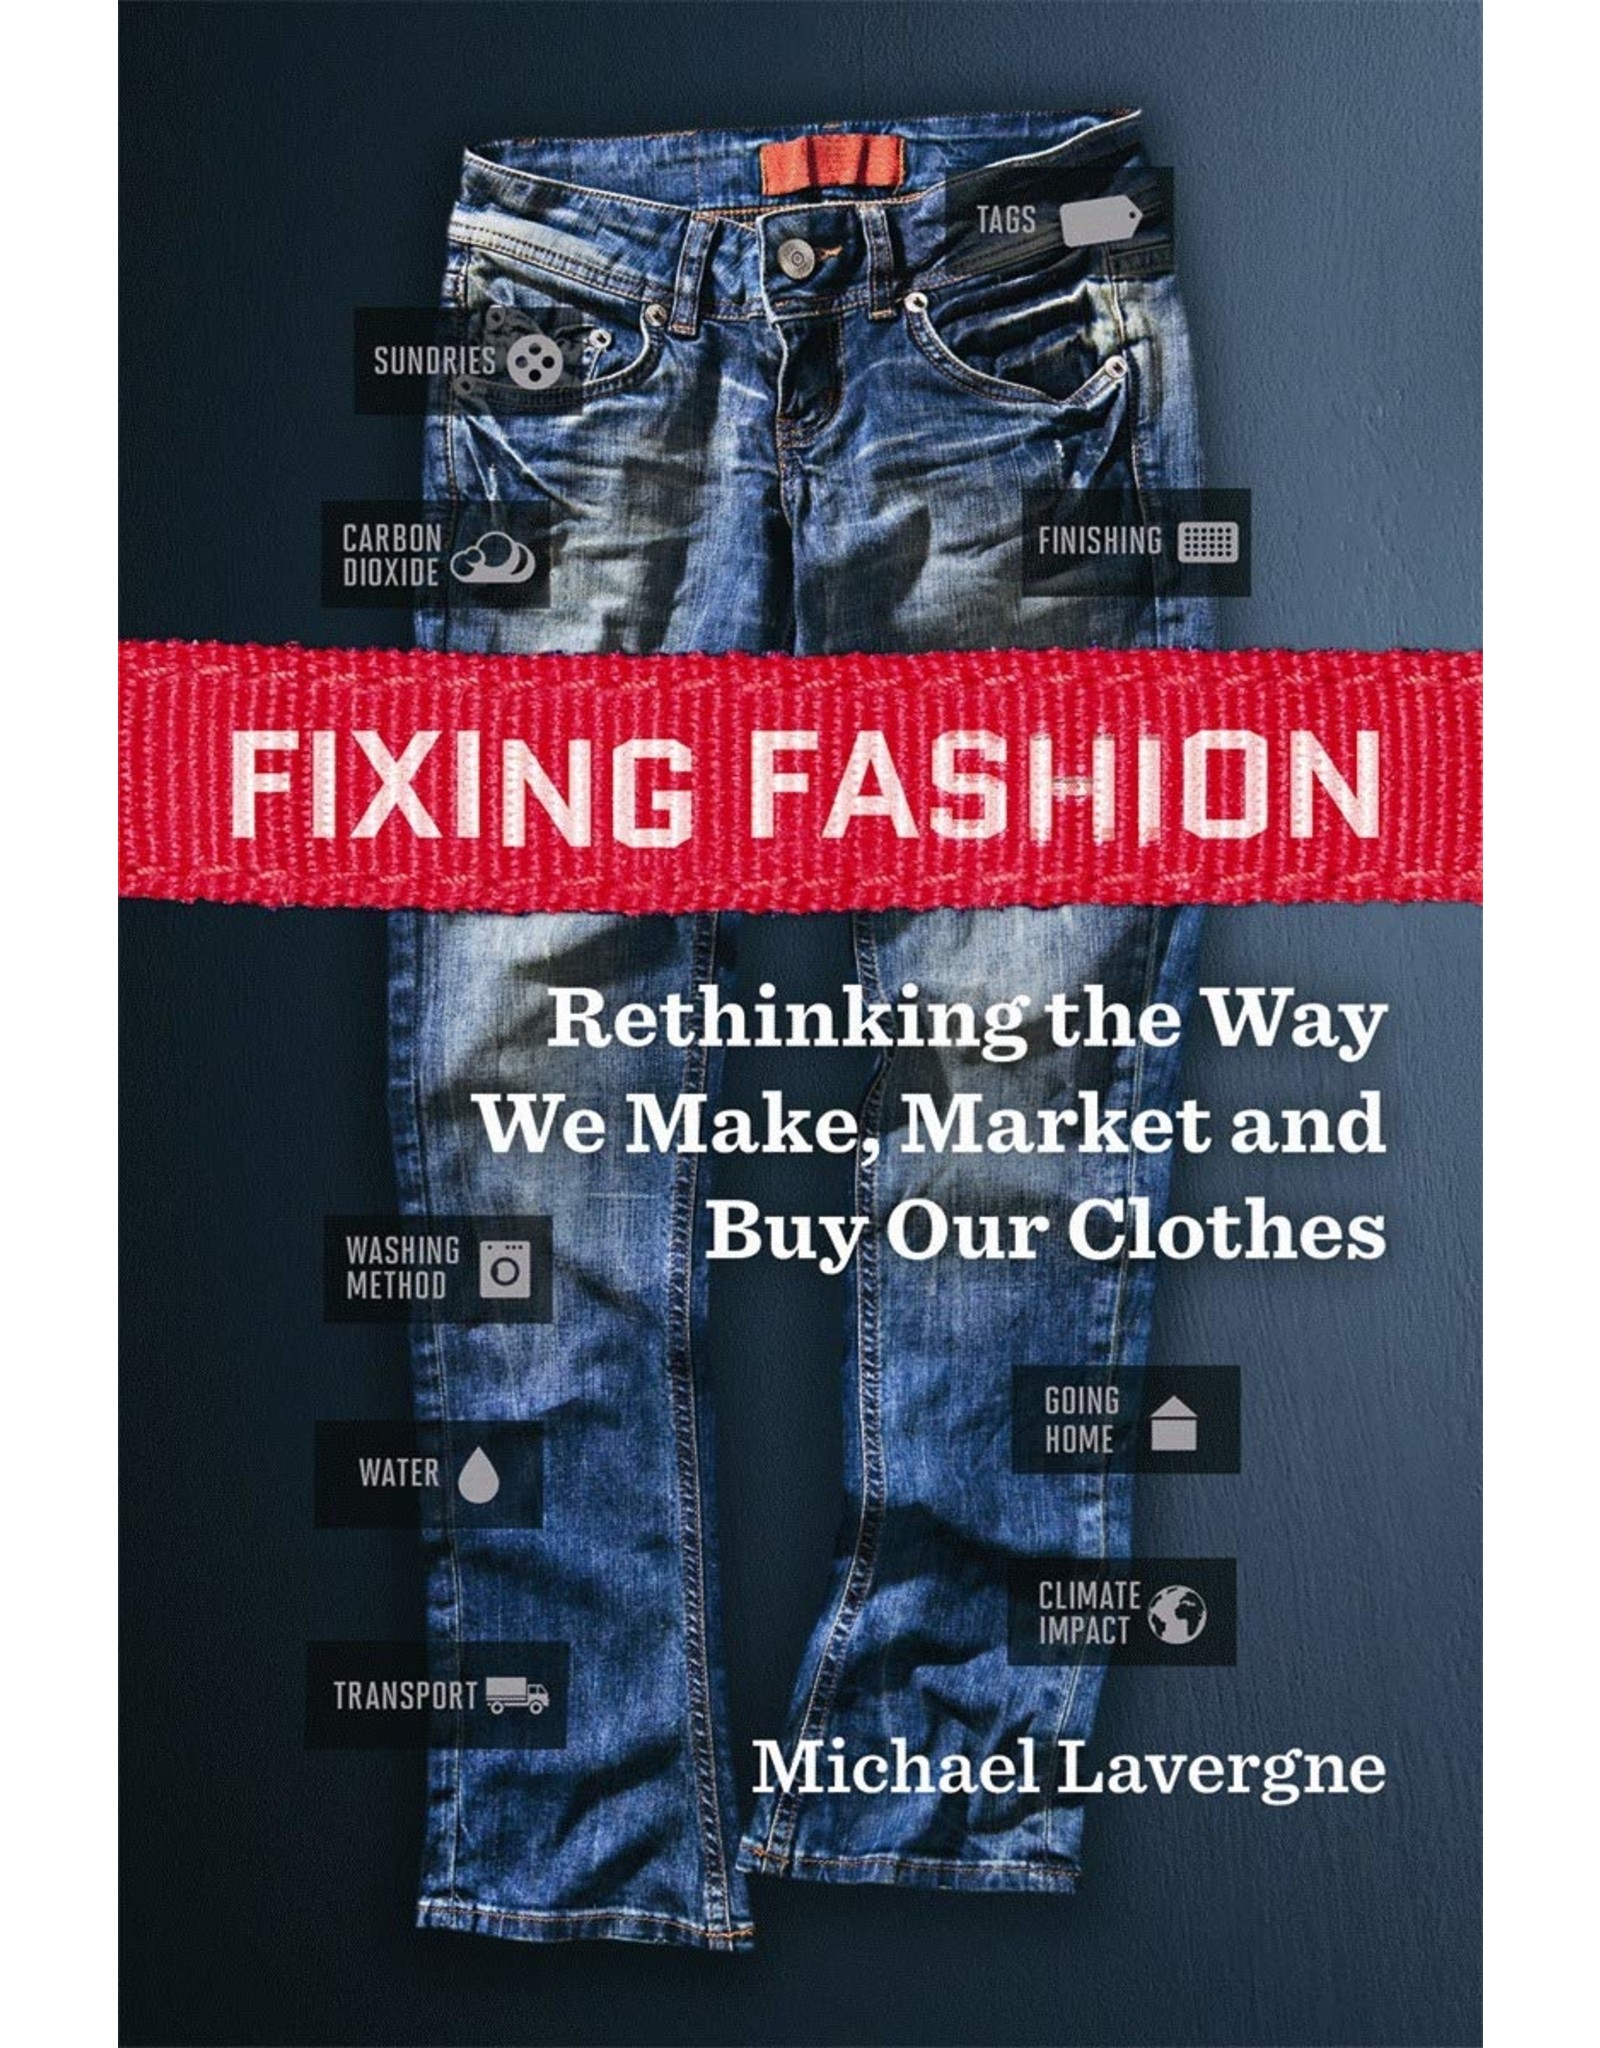 Literature Fixing Fashion: Rethinking the Way We Make, Market and Buy Our Clothes